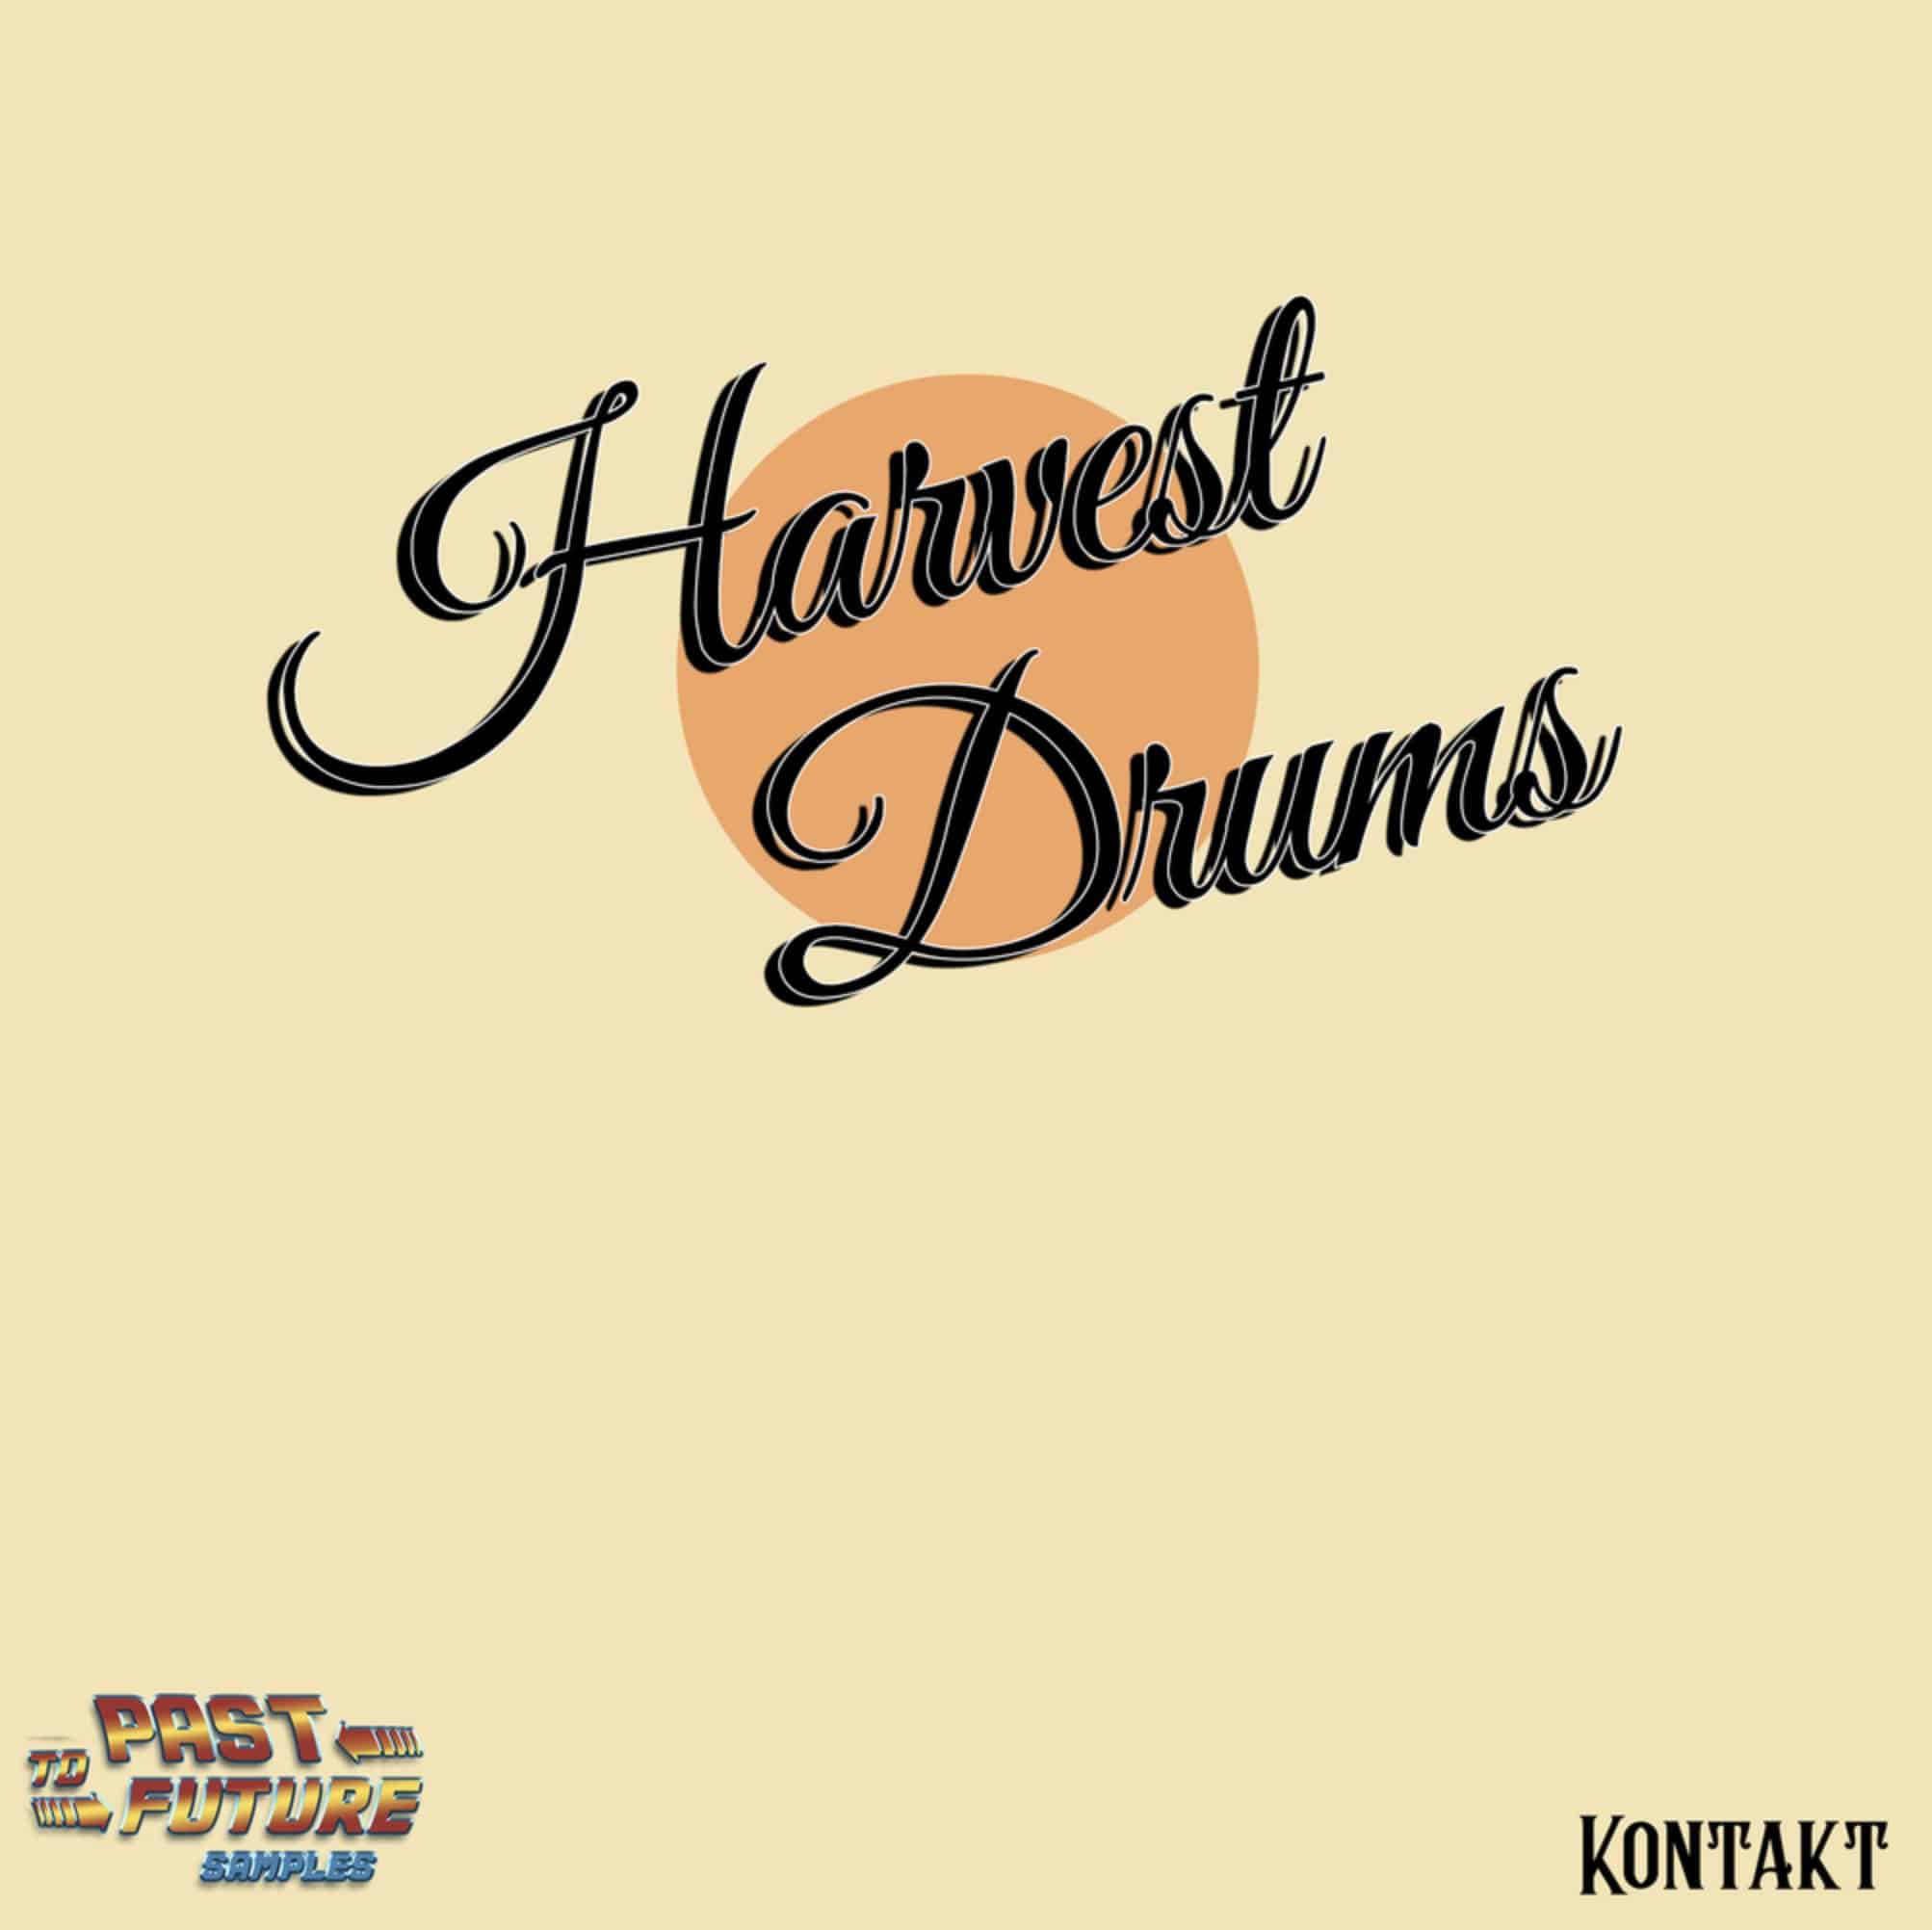 Past To Future Samples – Harvest Drums!